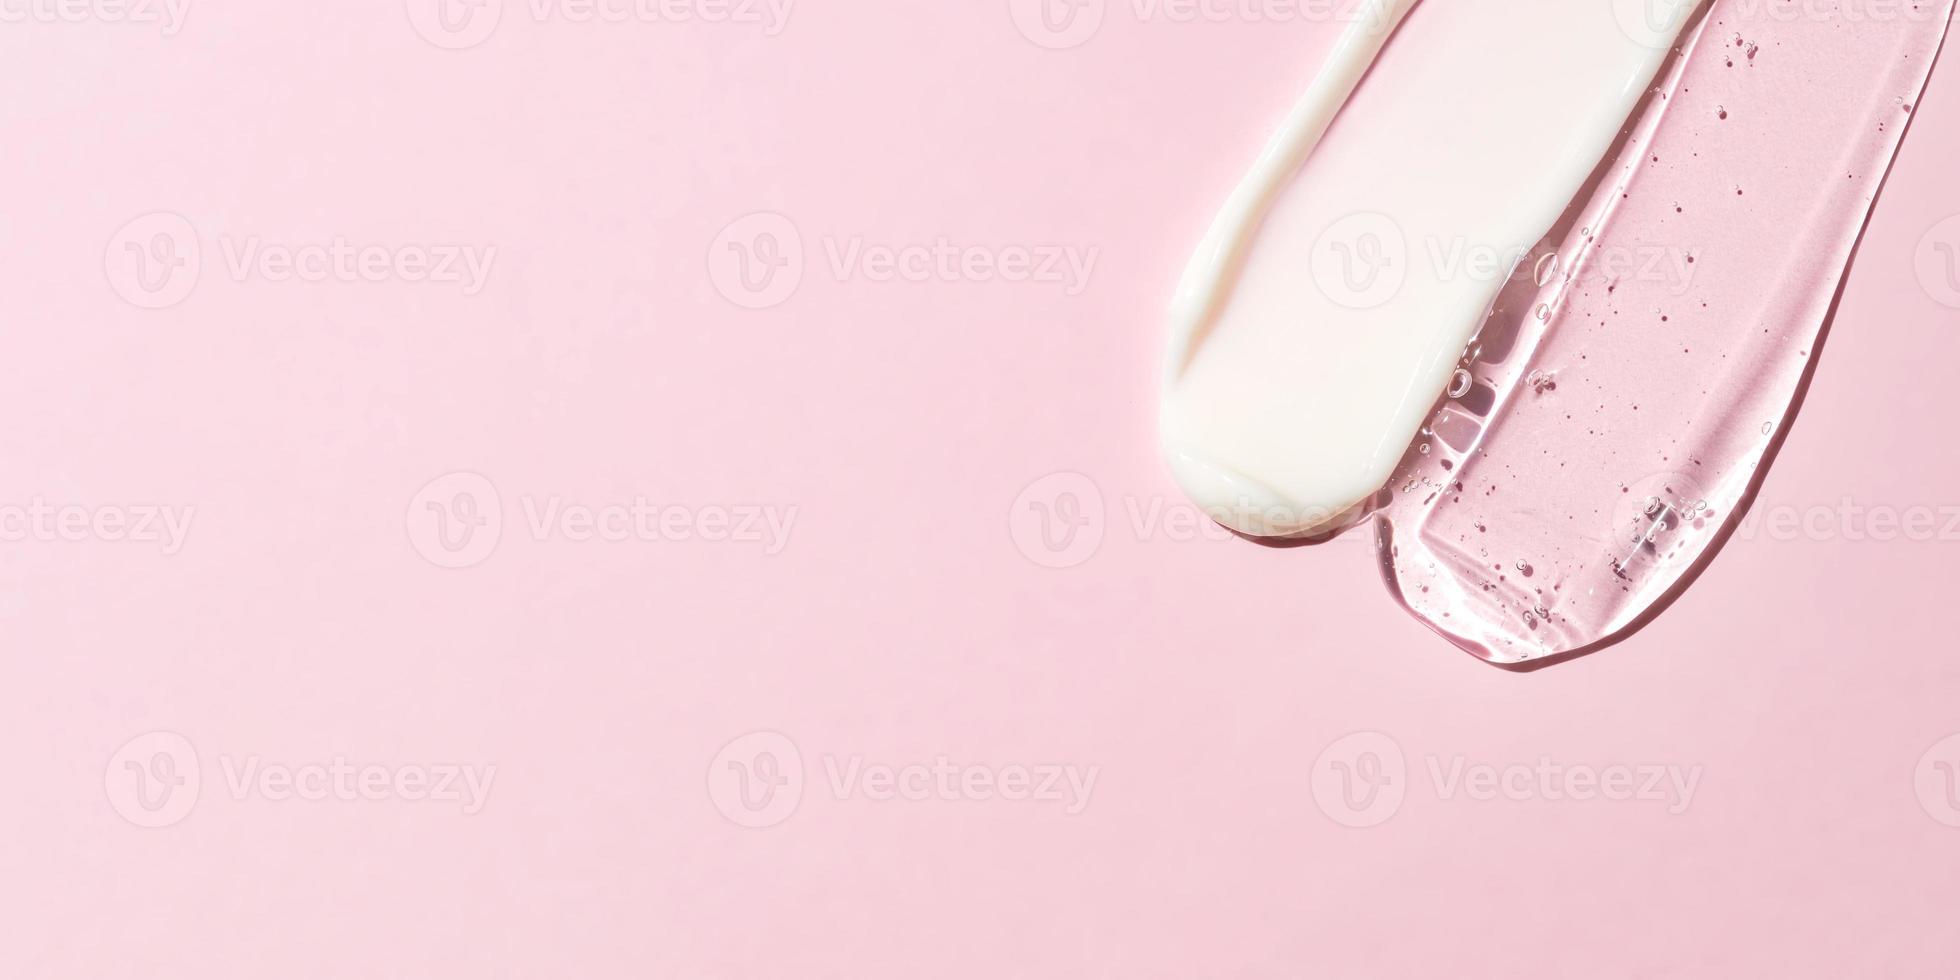 Cream and gel transparent cosmetic sample texture with bubbles on pink background. Skin care products smear with place for text. Banner photo